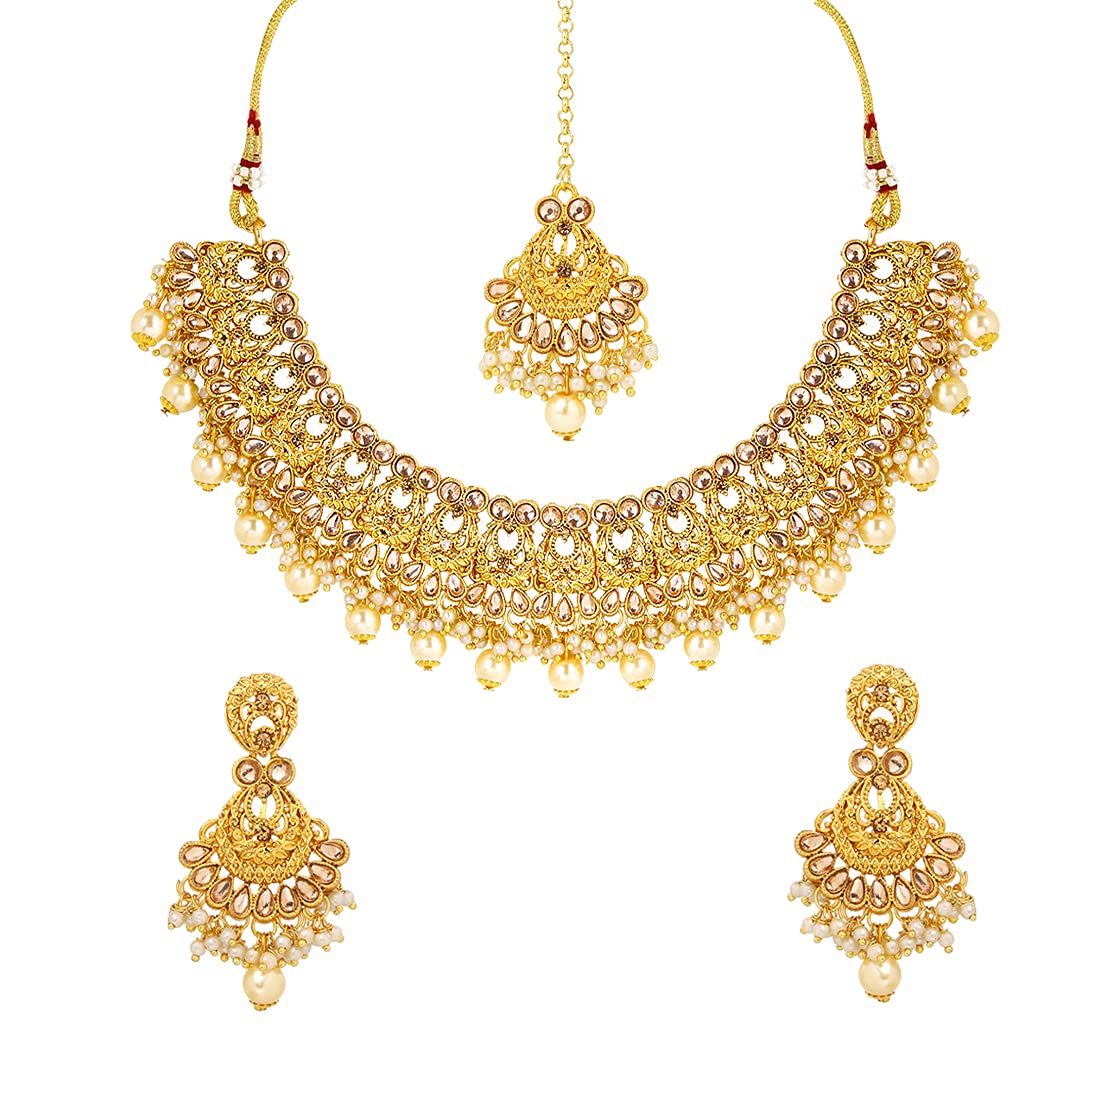 Yellow Chimes Ethnic Gold Plated Studded Kundan Beads Jewellery Set Traditional Choker Necklace Set with Earrings and maang Tikka for Women and Girls, Medium, YCTJNS-16DESGCK-GL